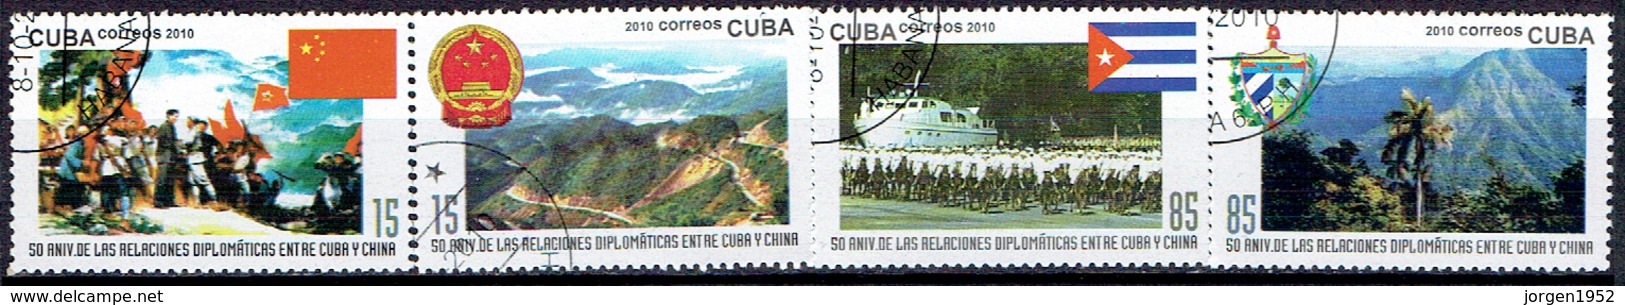 CUBA # FROM 2010 STAMPWORLD 5471-75 - Used Stamps